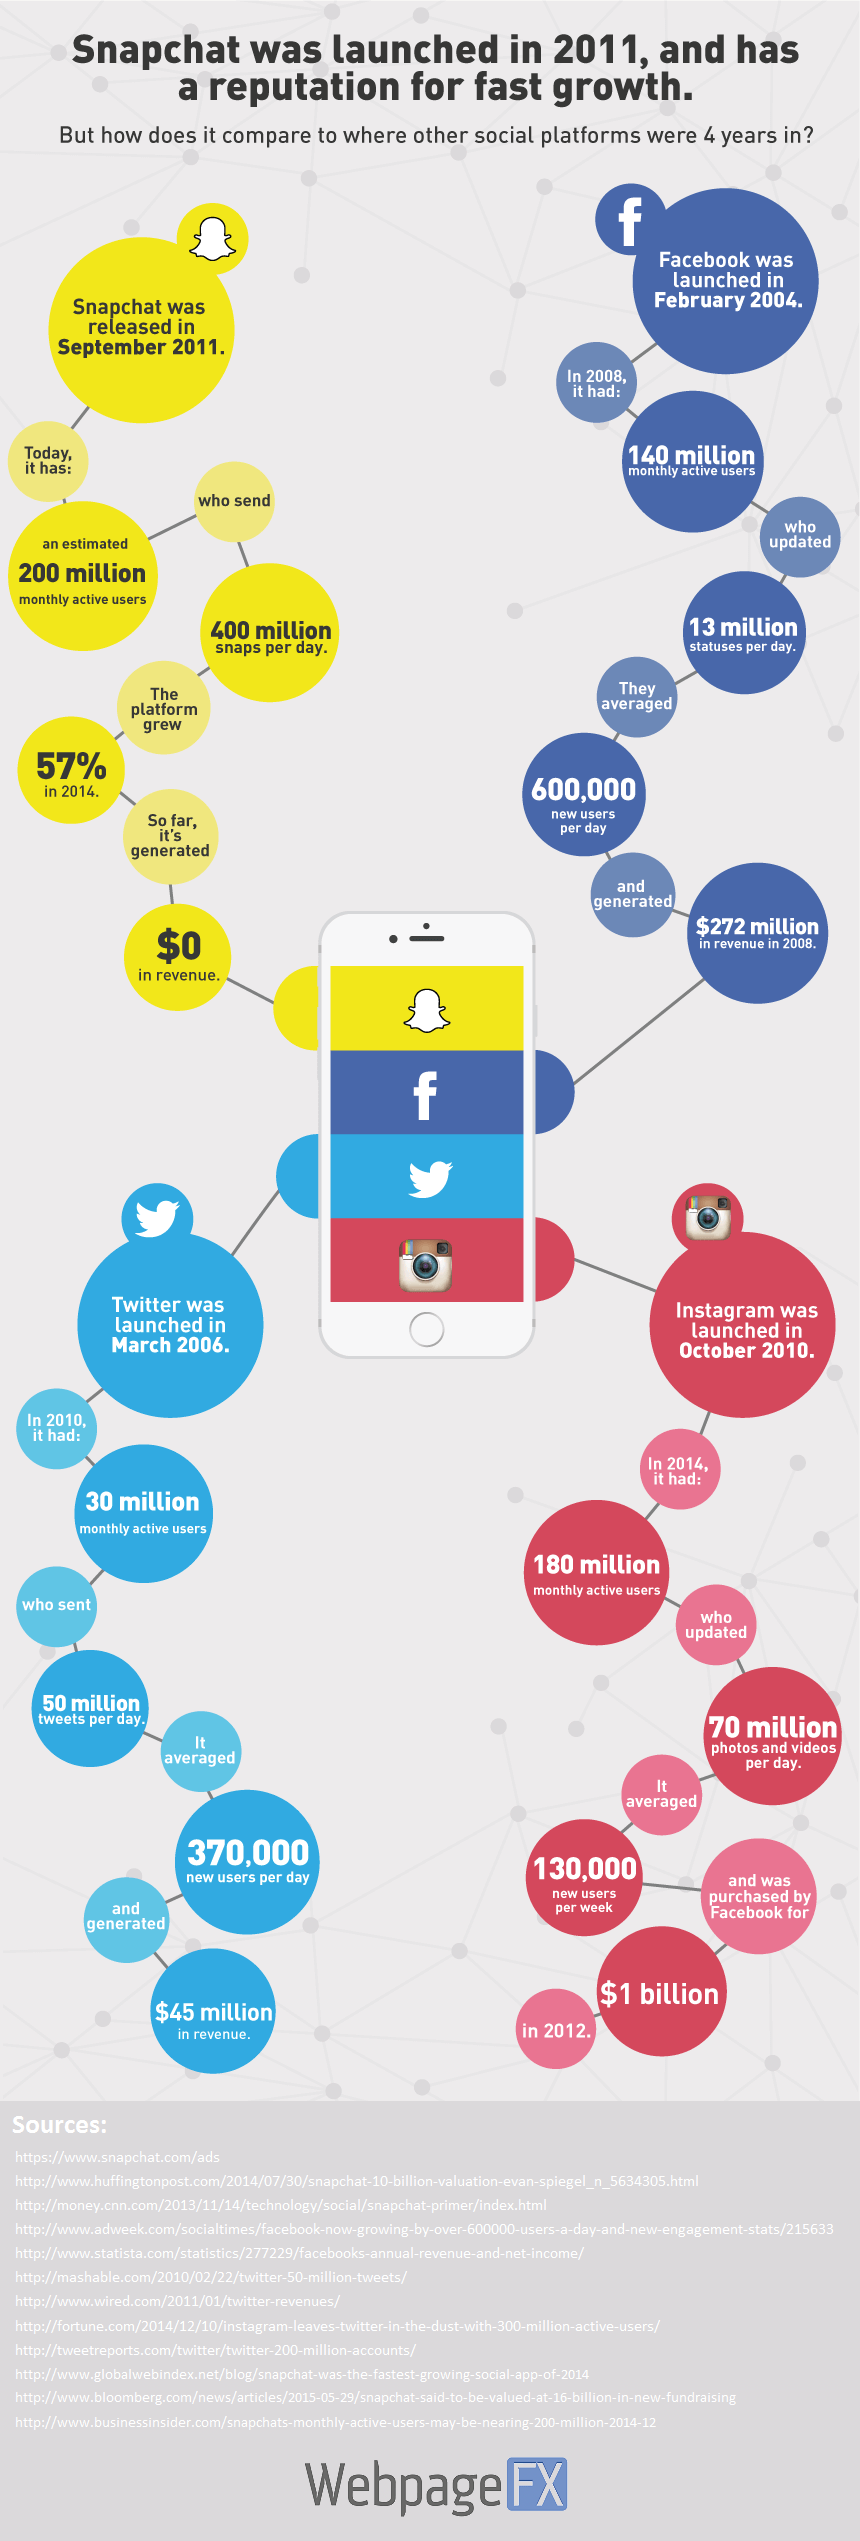 snapchat-growth-infographic